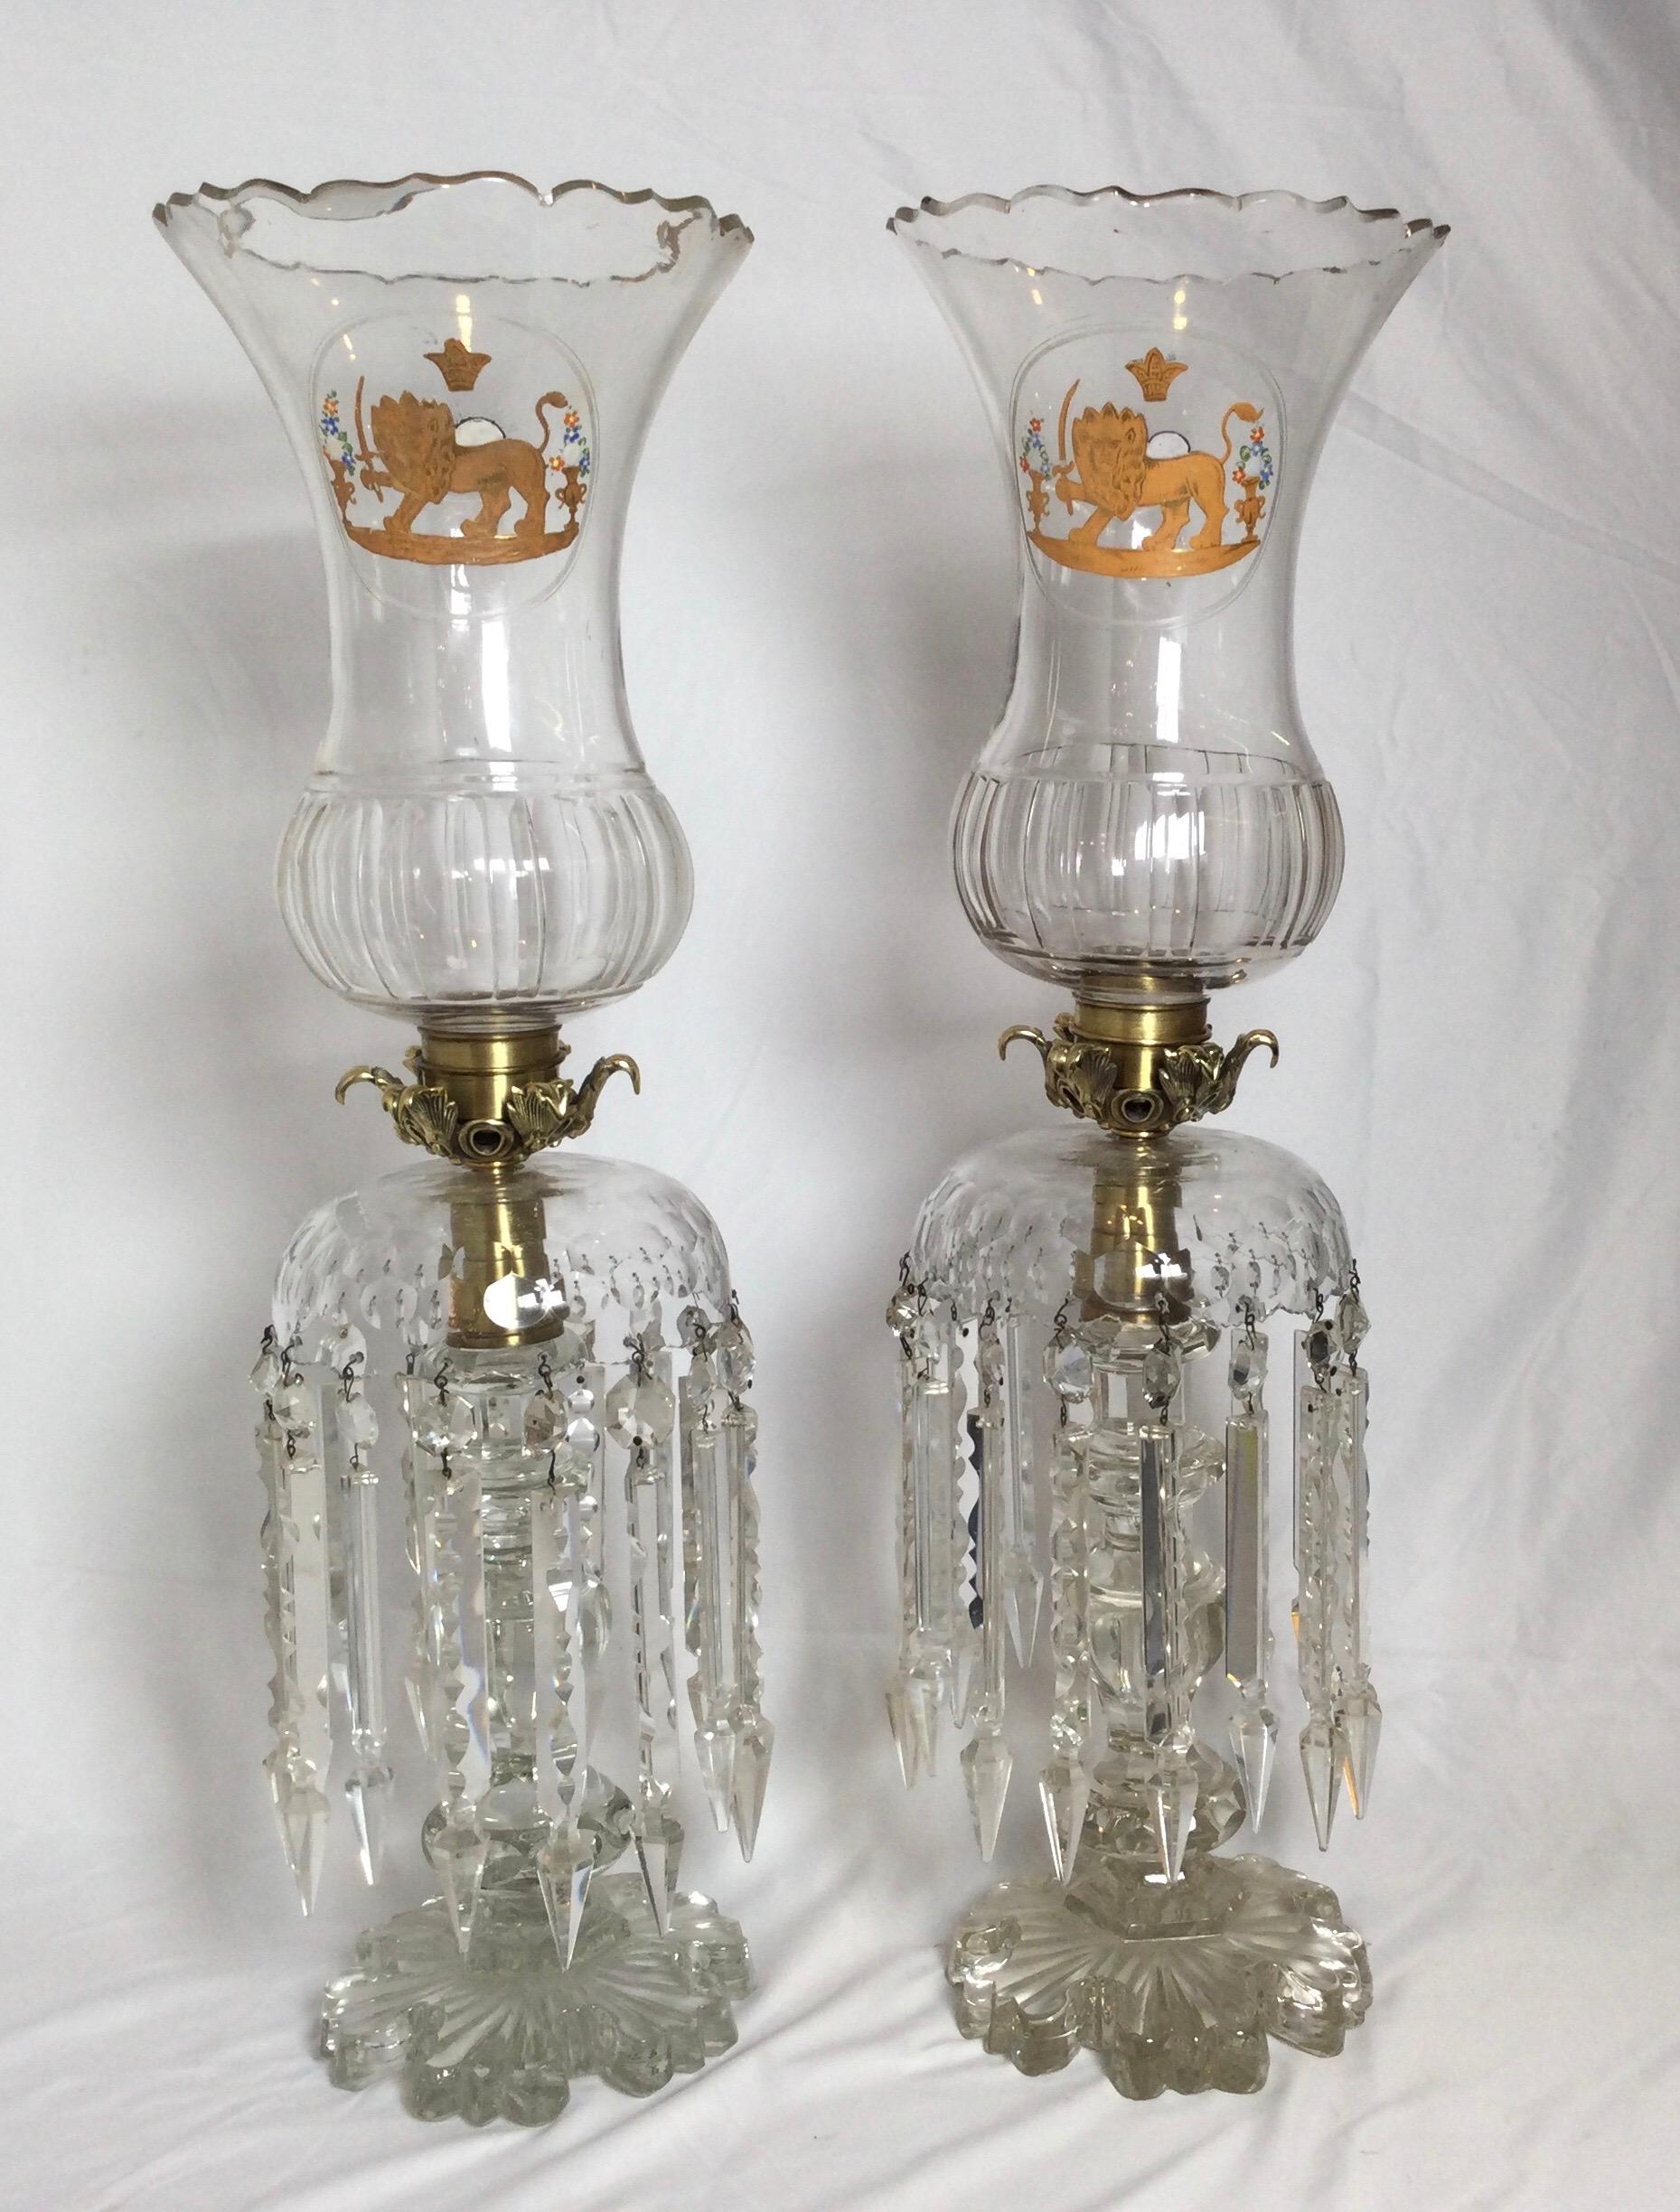 Victorian Pair of Cut Glass Hurricane Candlesticks with Lion Decoration